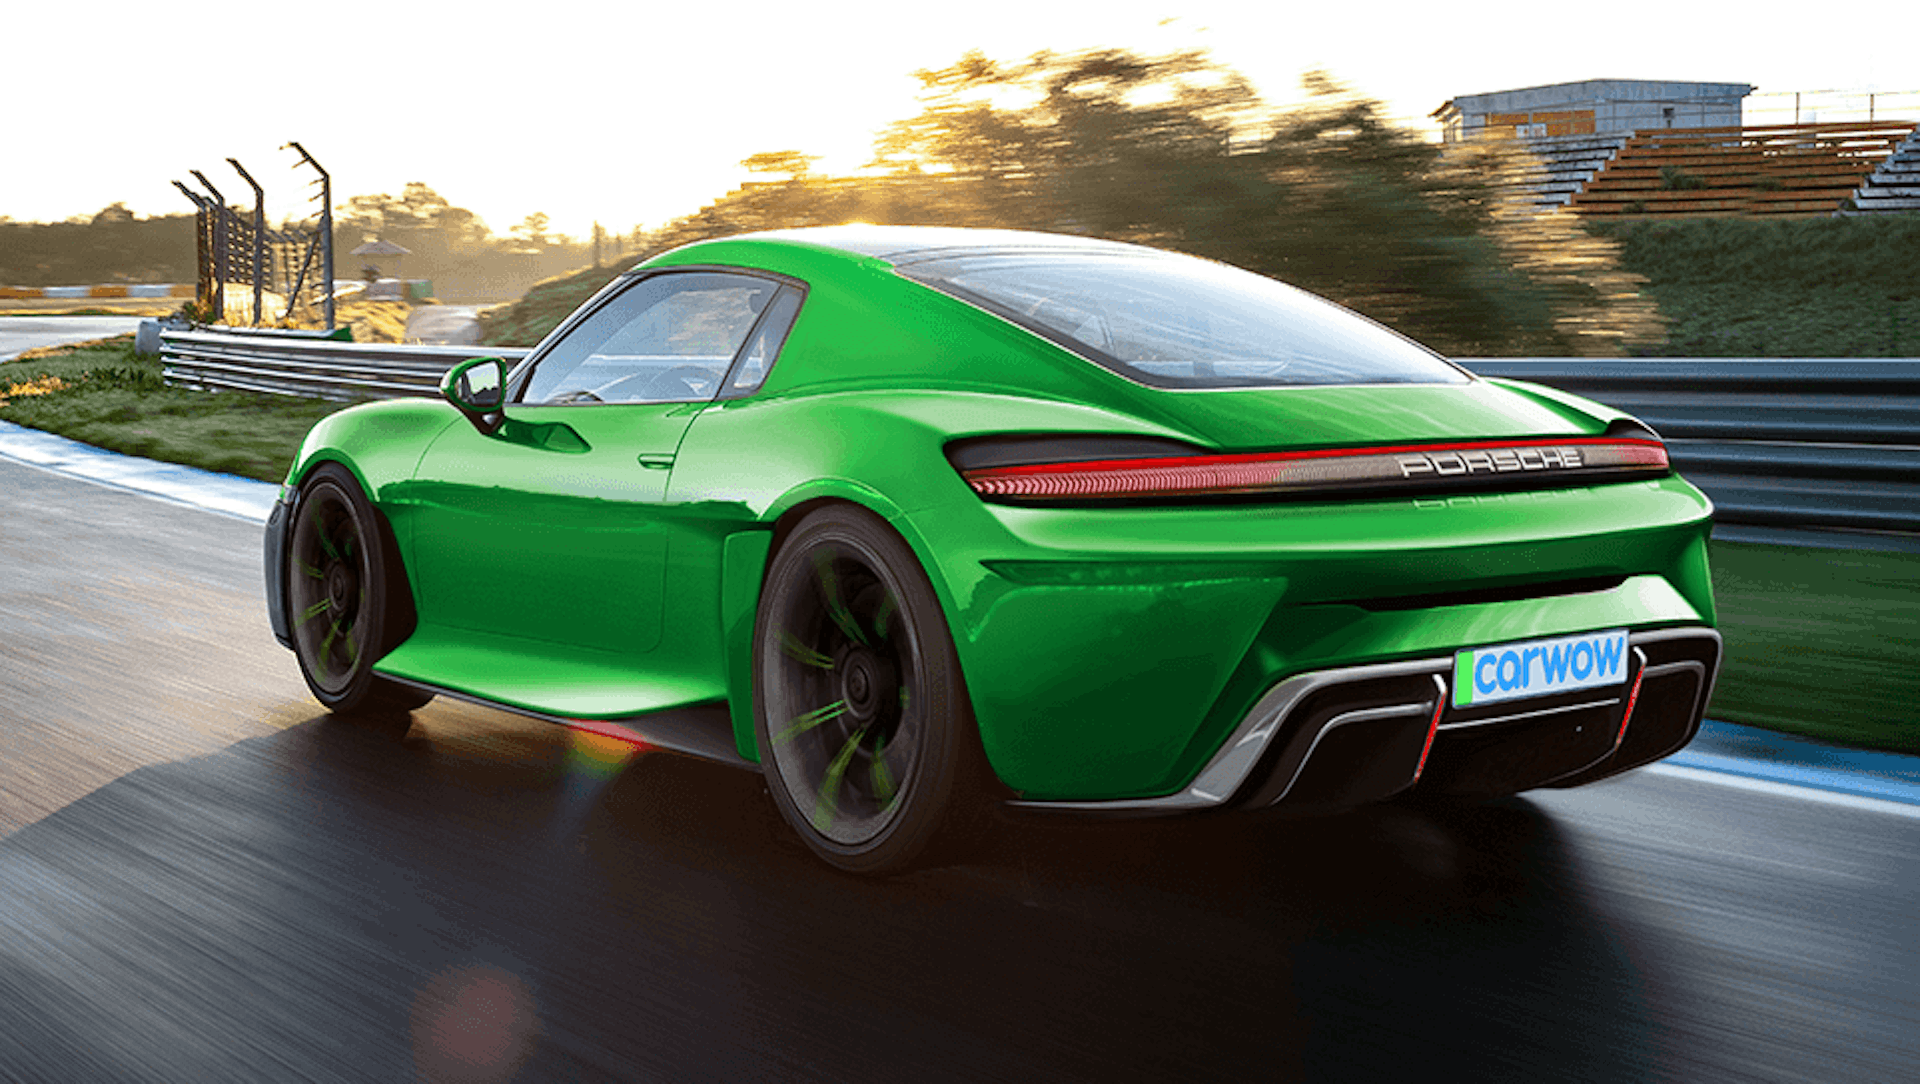 New electric Porsche Cayman confirmed for 2025 everything we know so